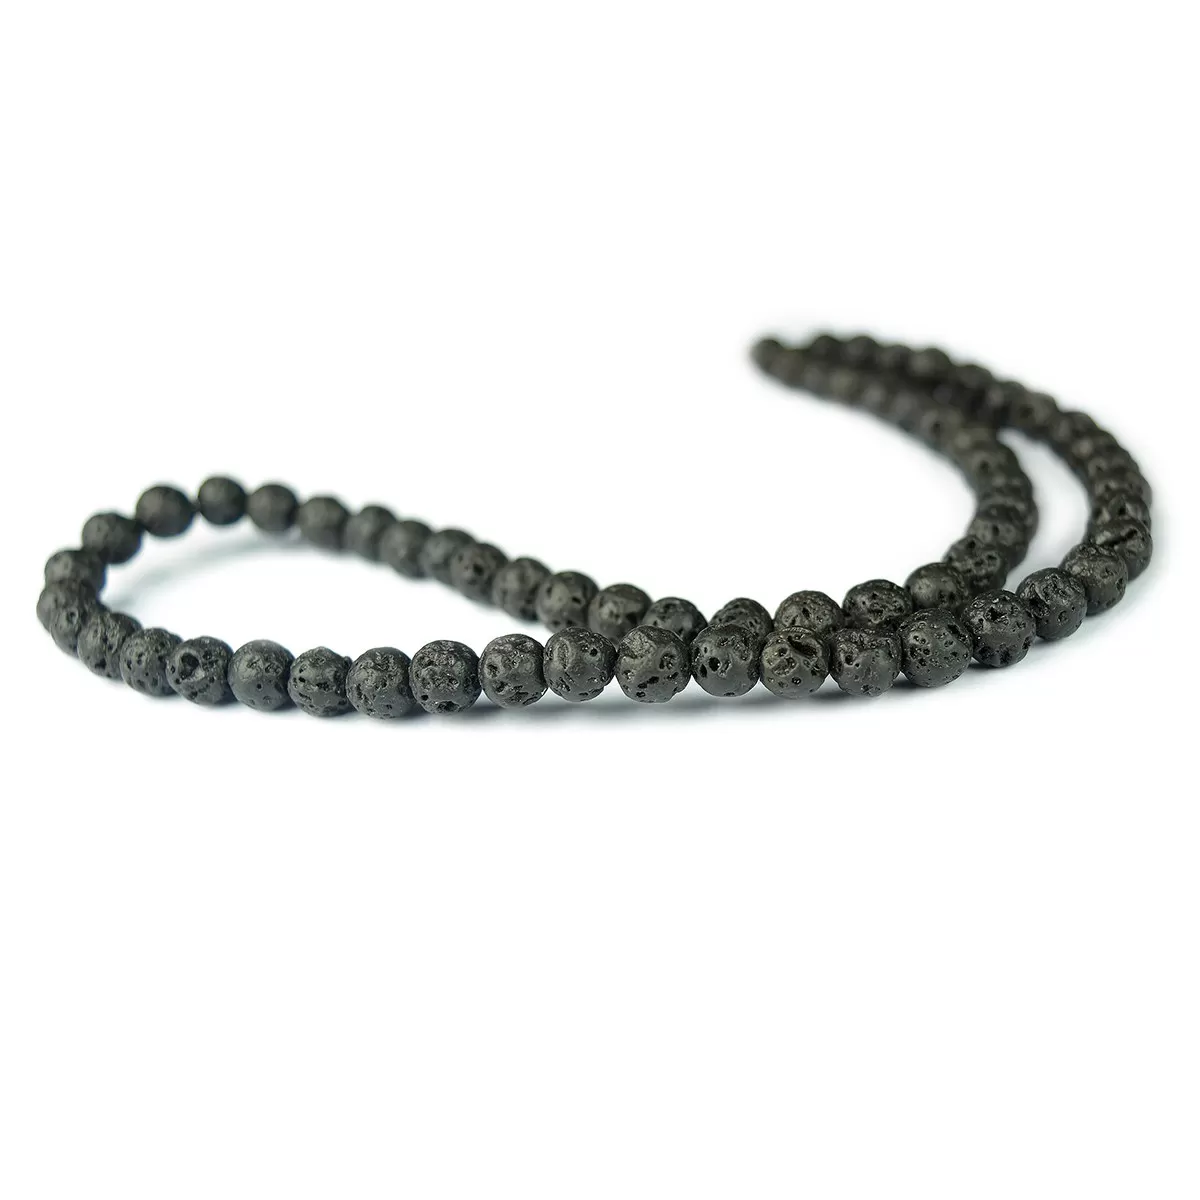 Lava Loose Beads Crystal 6 mm Stone Beads for Jewellery Making Bracelet Beads Mala Beads Crystal Beads for Jewellery Making Necklace/Bracelet/Mala, 3 image